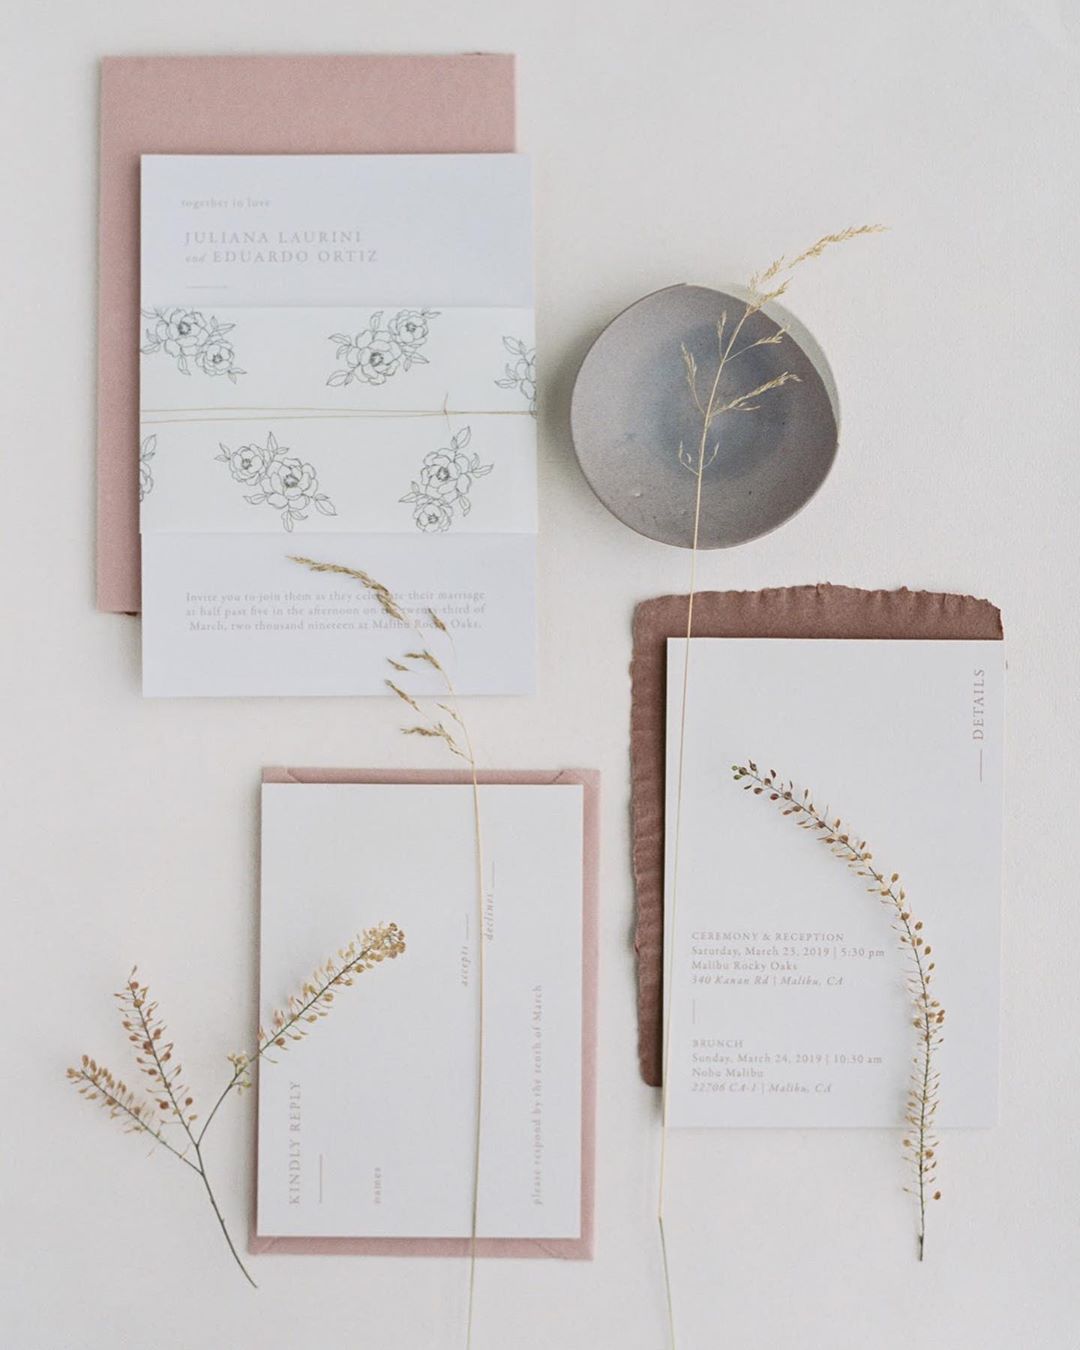 Semi-custom wedding invitations for modern romantics with botanically illustrated belly band and warm toned envelopes, designed by Dominique Alba, styled by Ginny Au and captured by Maria Lamb Photography